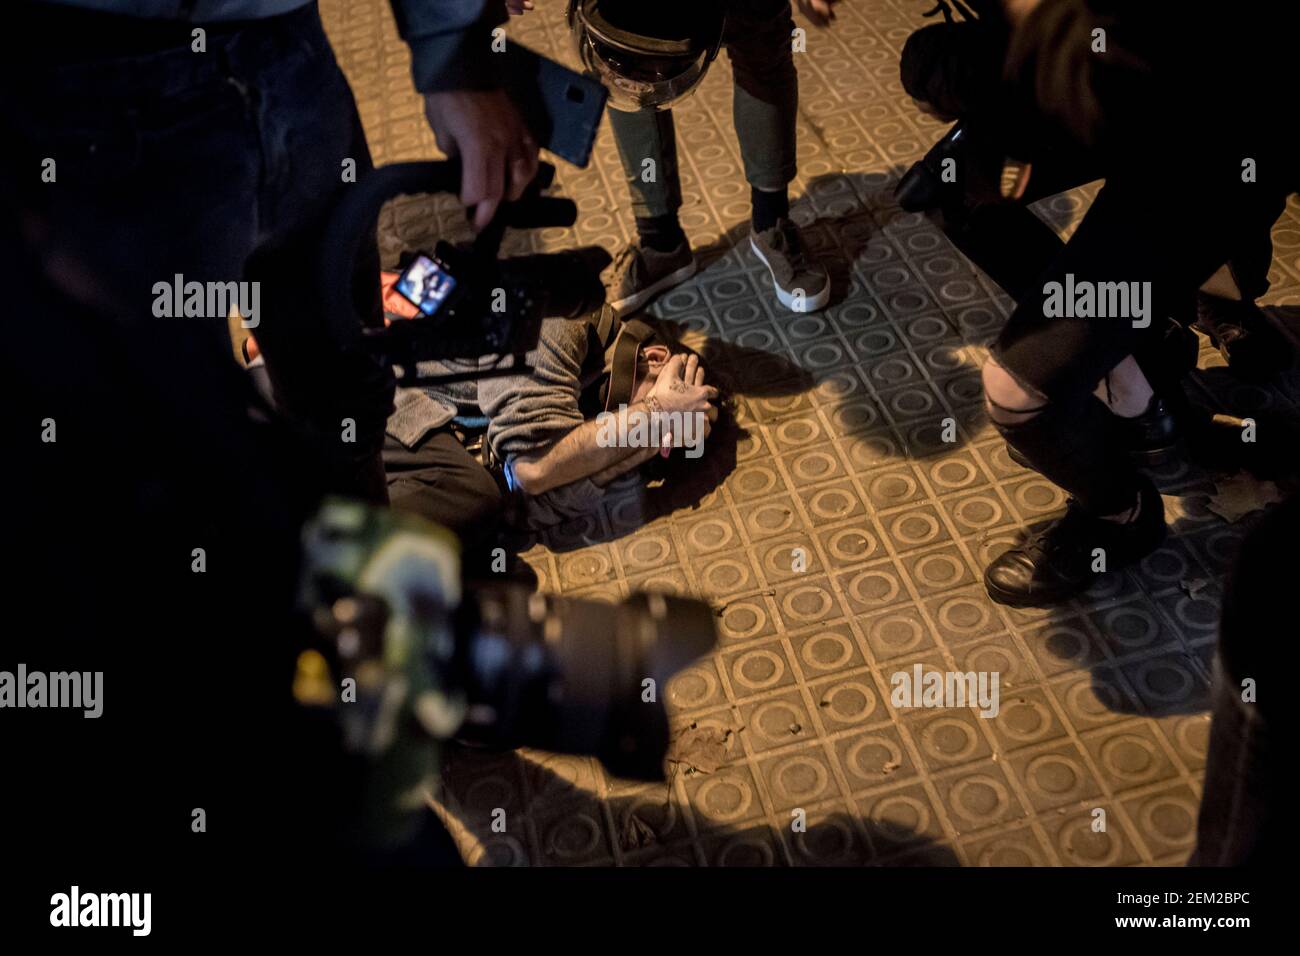 An injured journalist is on the ground surrounded by colleagues during a night of protests in support of Pablo Hasel in Barcelona. A week of protests after rapper Pablo Hasel was jailed for song lyrics and opinions on social media against Spanish monarchy. Stock Photo